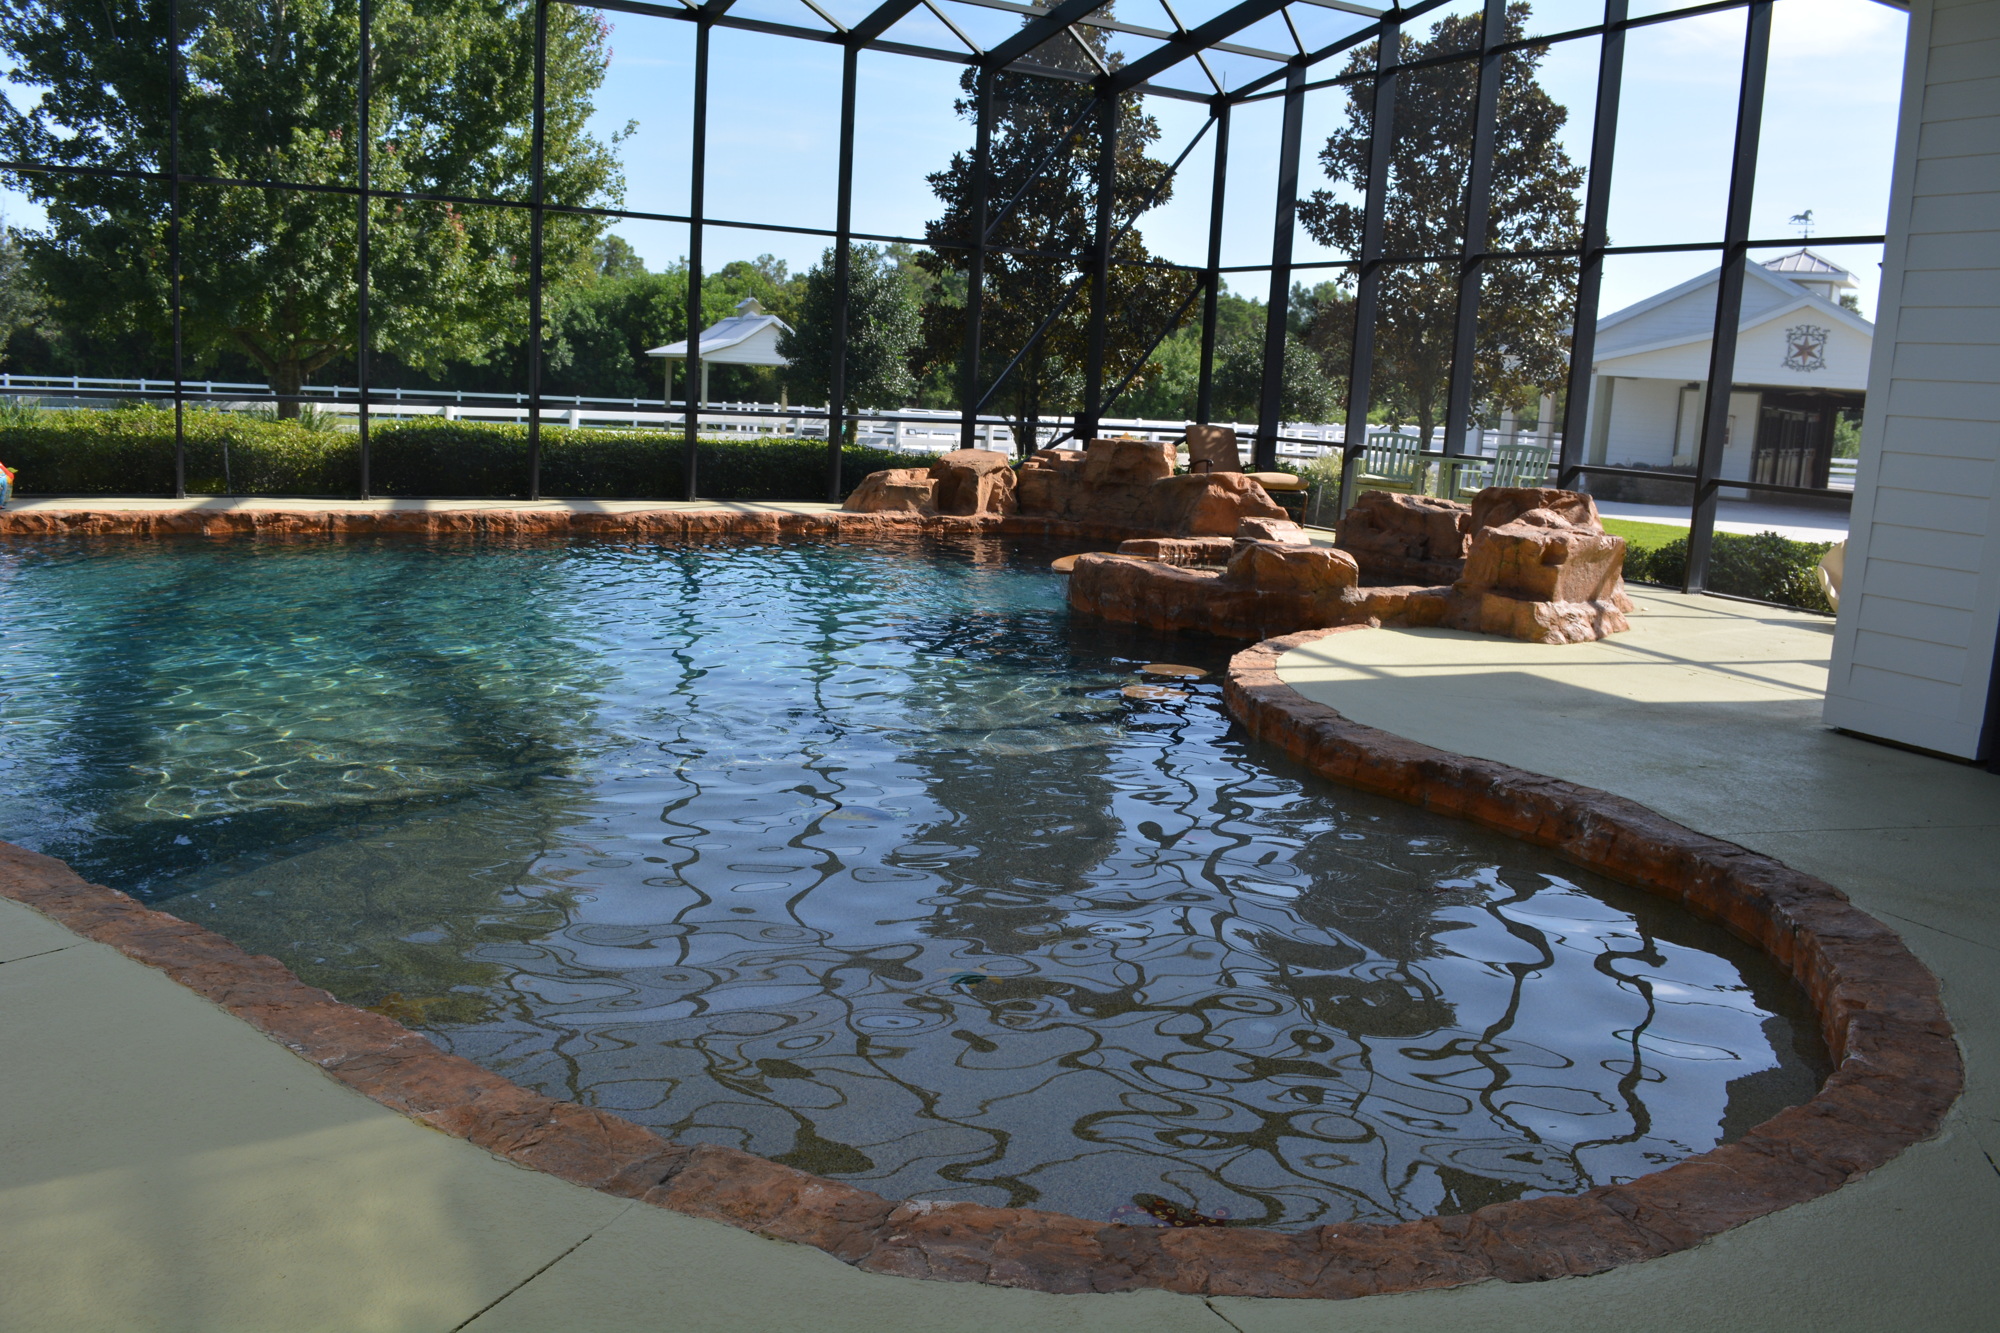 The customized lighted pool and spa has a two-tone pebble ted surface, swim-out and sitting areas, two in-water tide stools that face a television, a waterfall and a complete outdoor kitchen with a gas commercial grill and stove and a refrigerator.